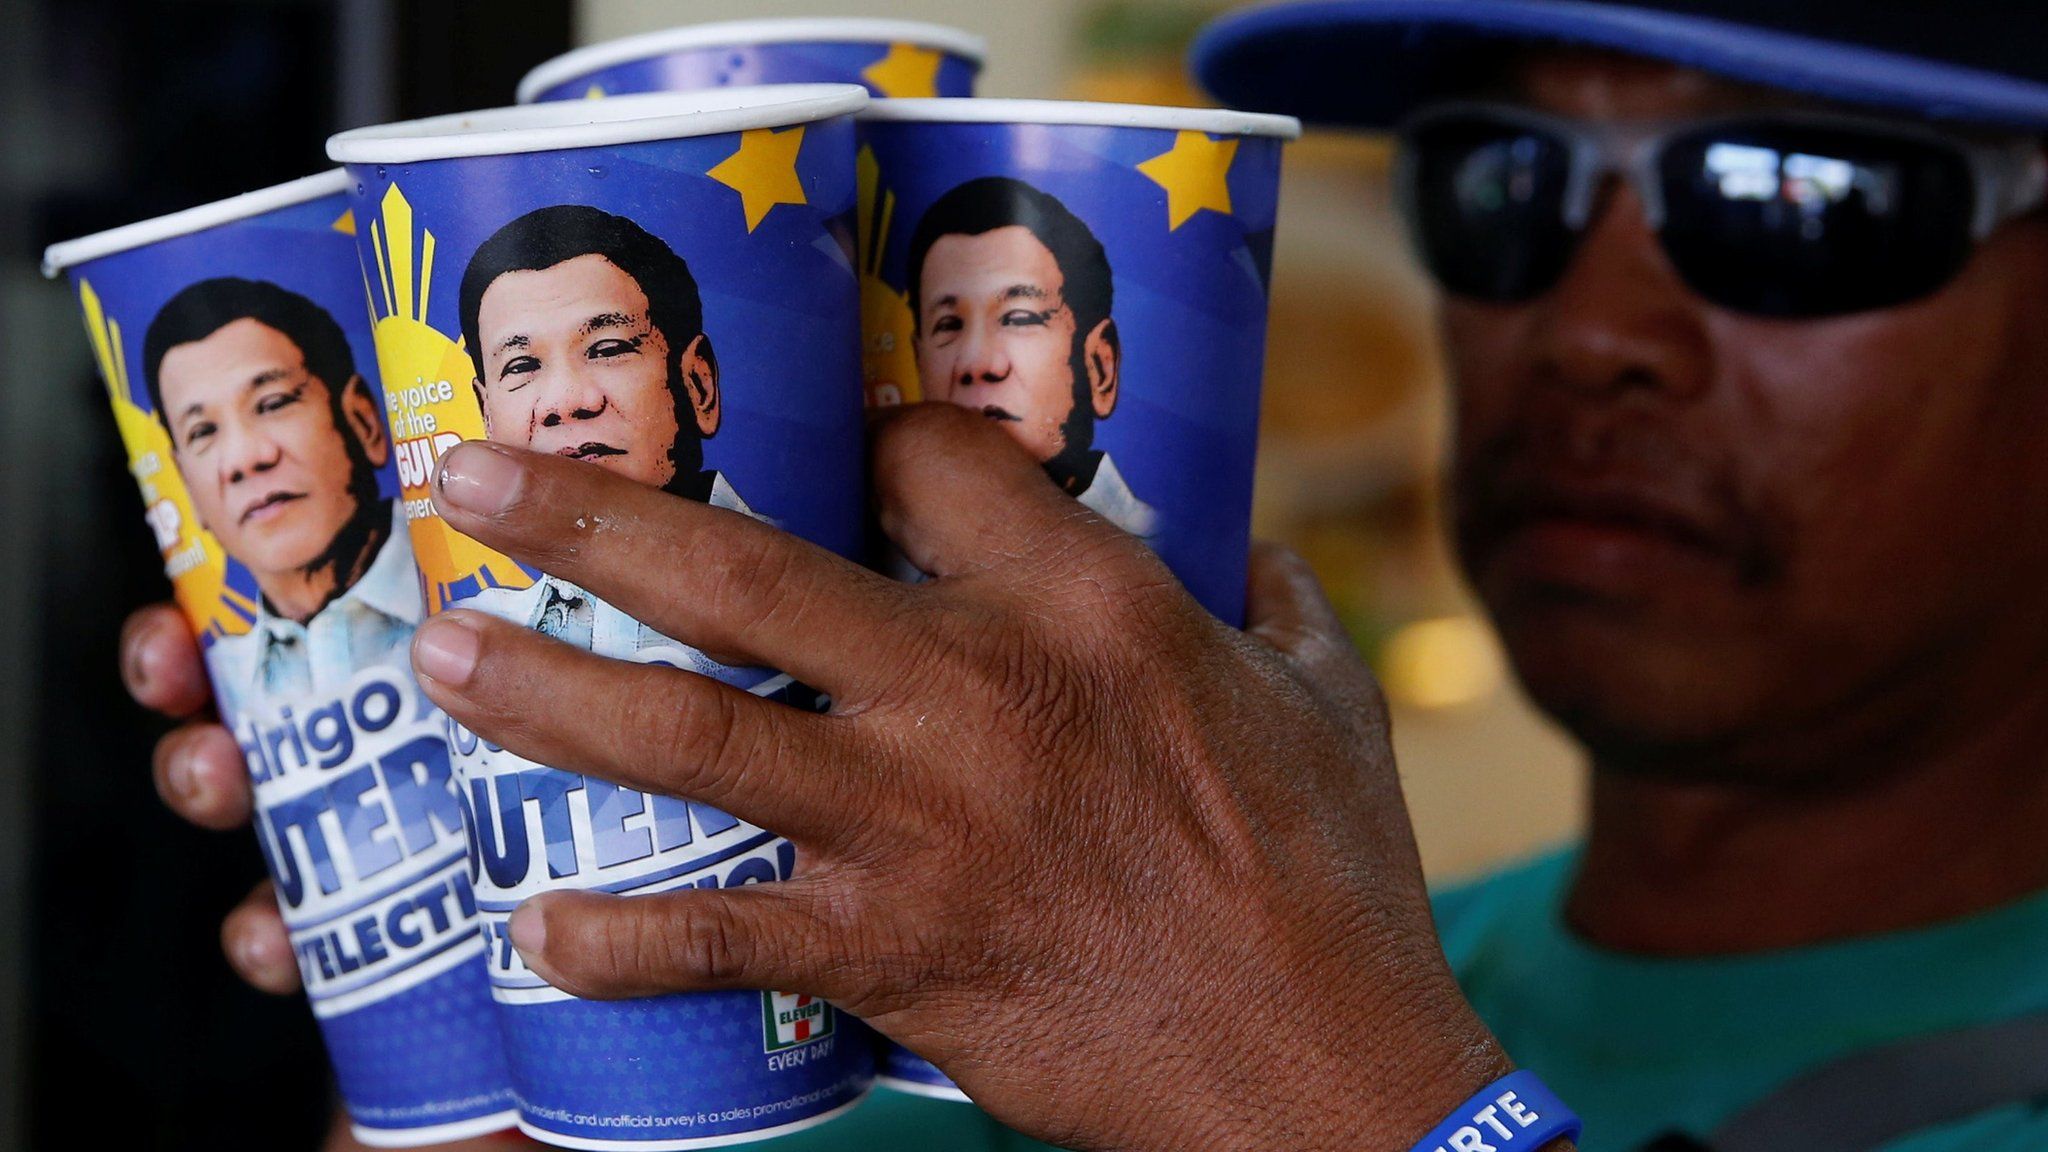 Four Duterte fizzy drink cups being held by a man out of shot